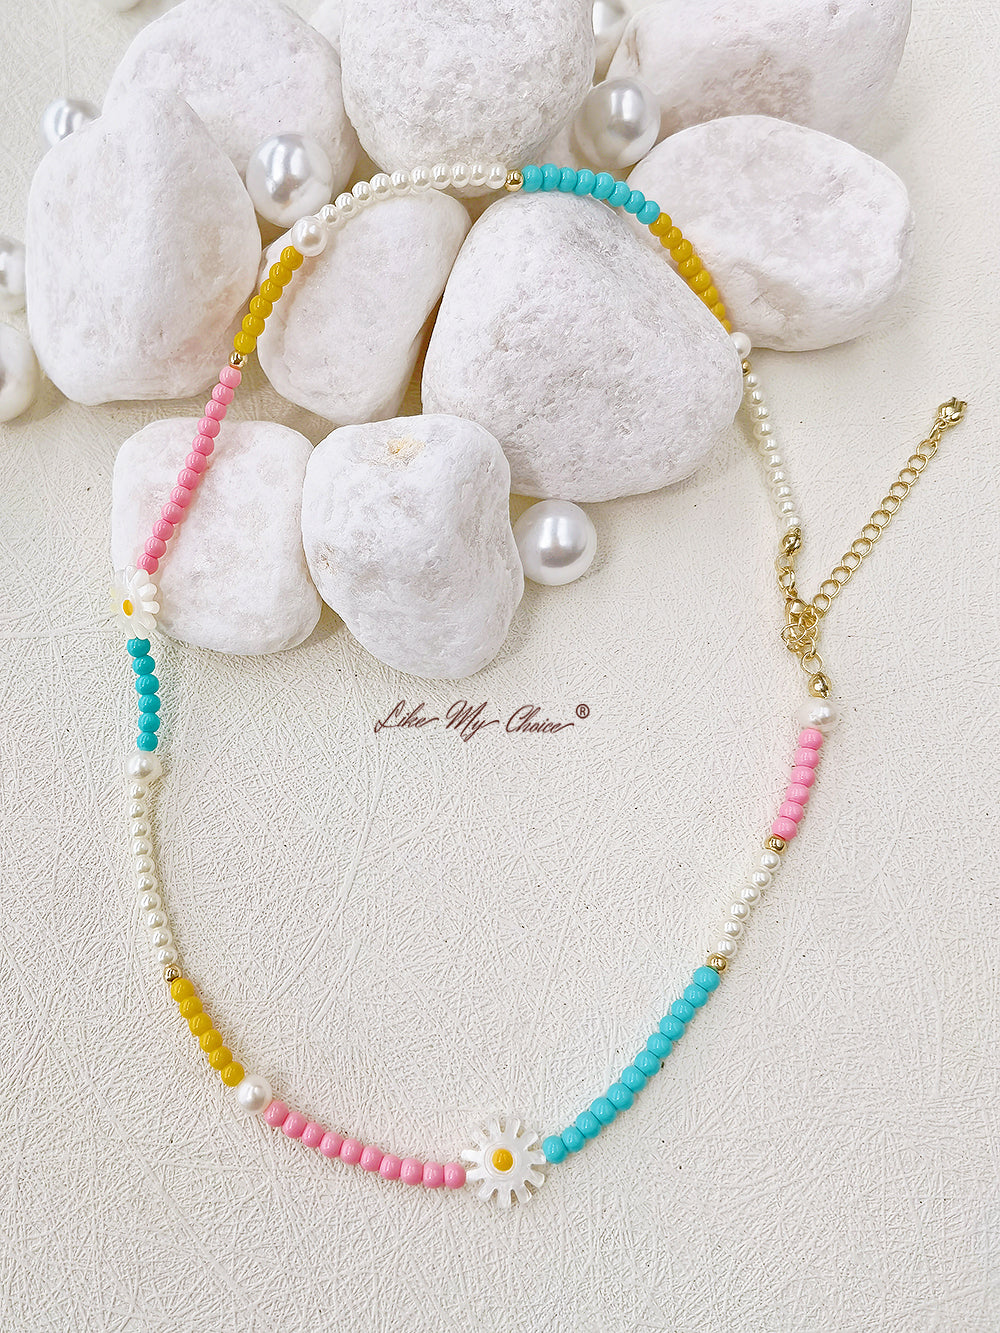 Handmade Colorful Beaded Real Pearl Necklace for Summer